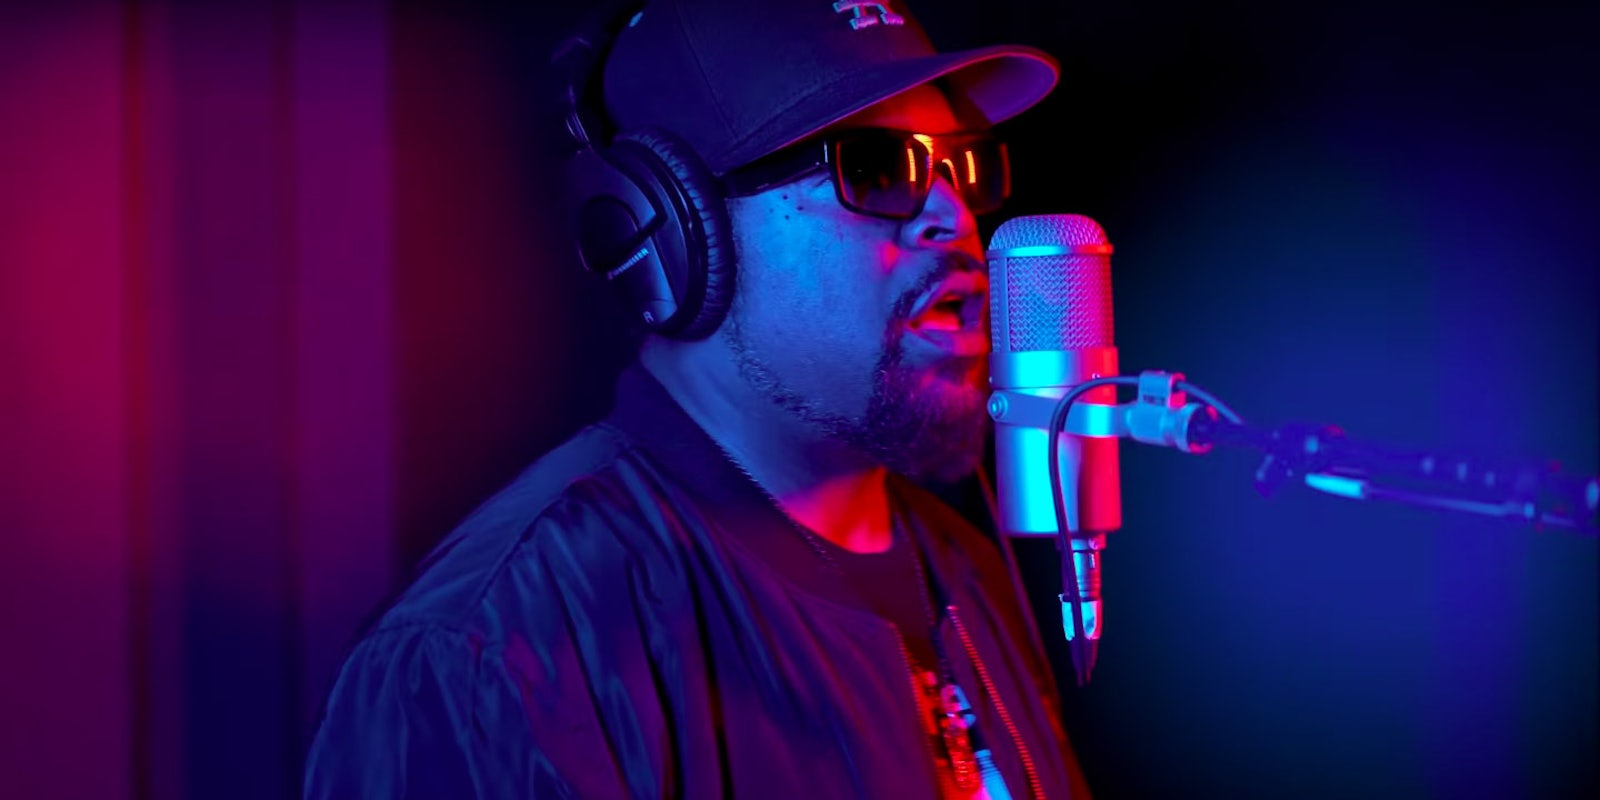 Ice Cube's song 'Arrest the President' compares Trump to Satan.